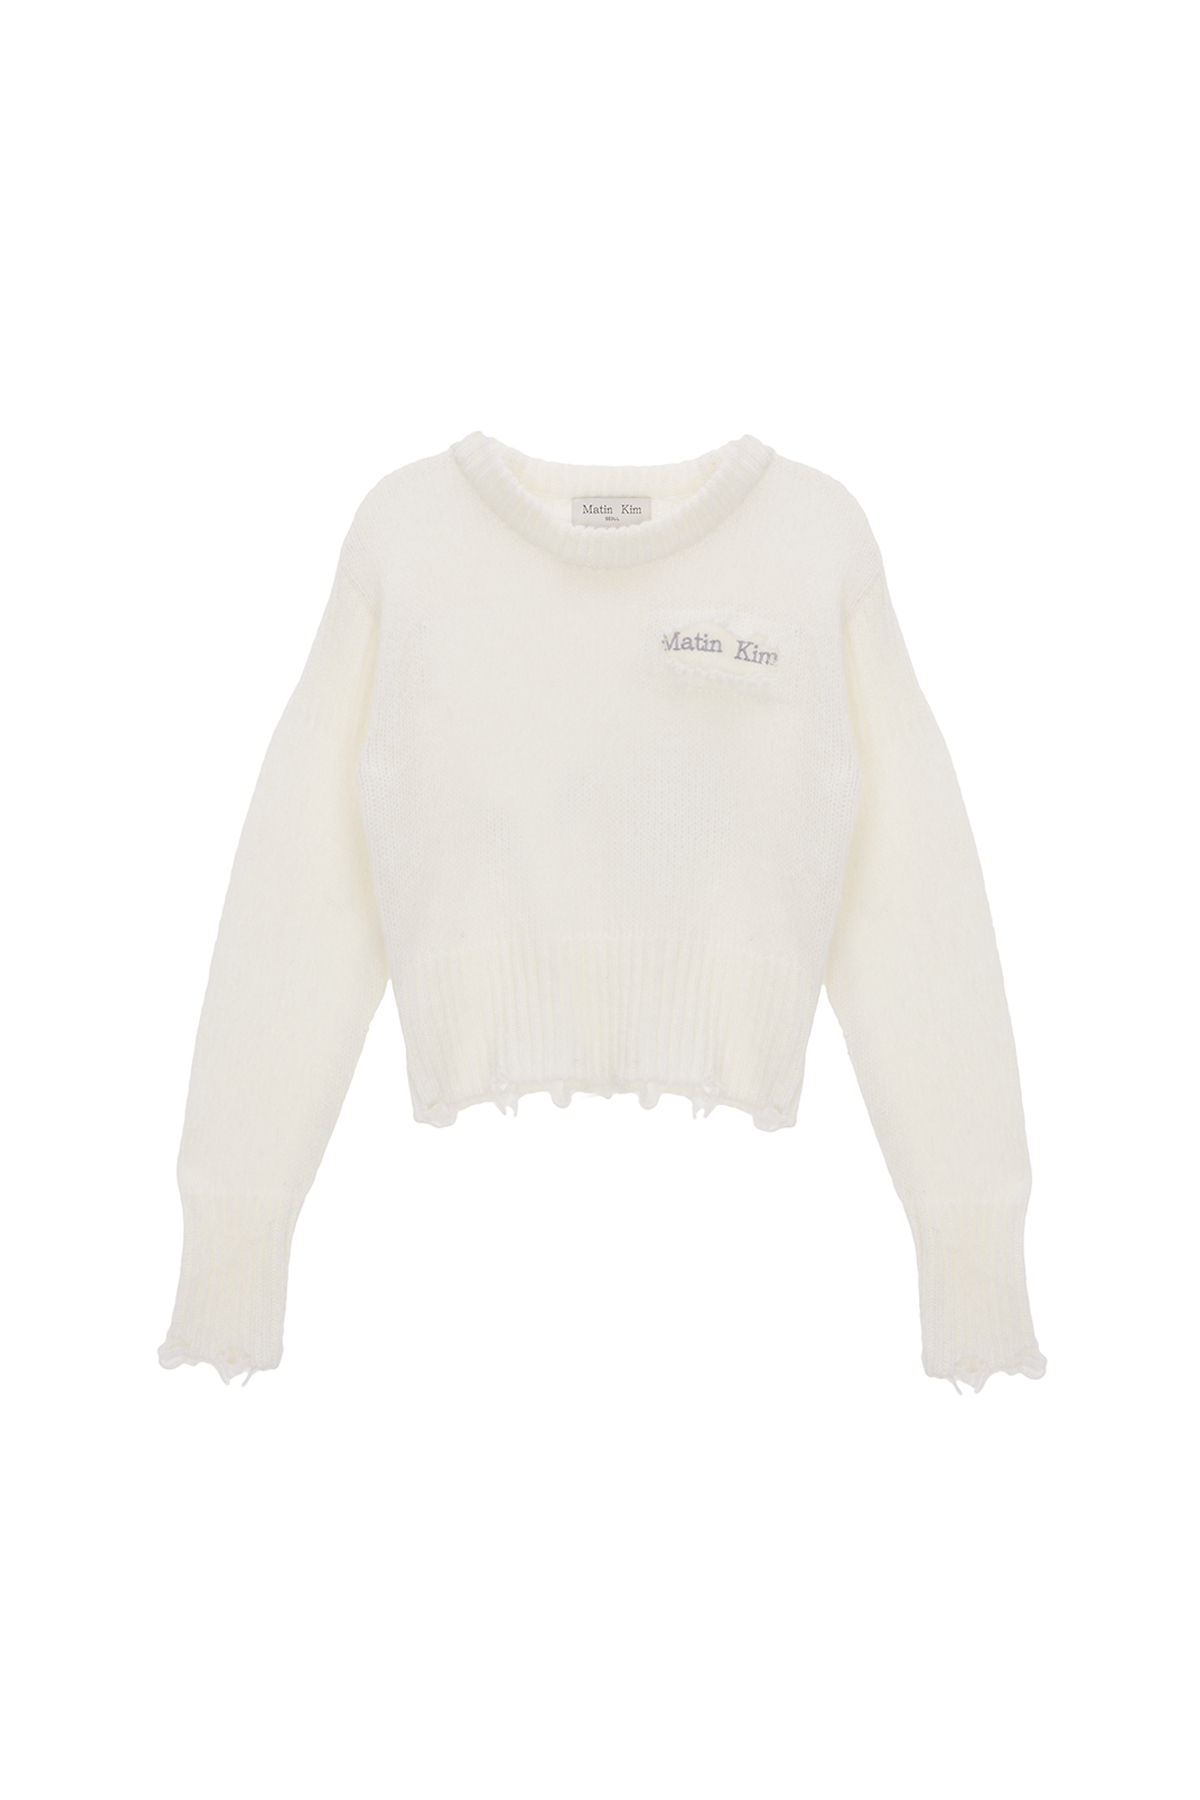 DAMAGE SOLID KNIT PULLOVER IN IVORY